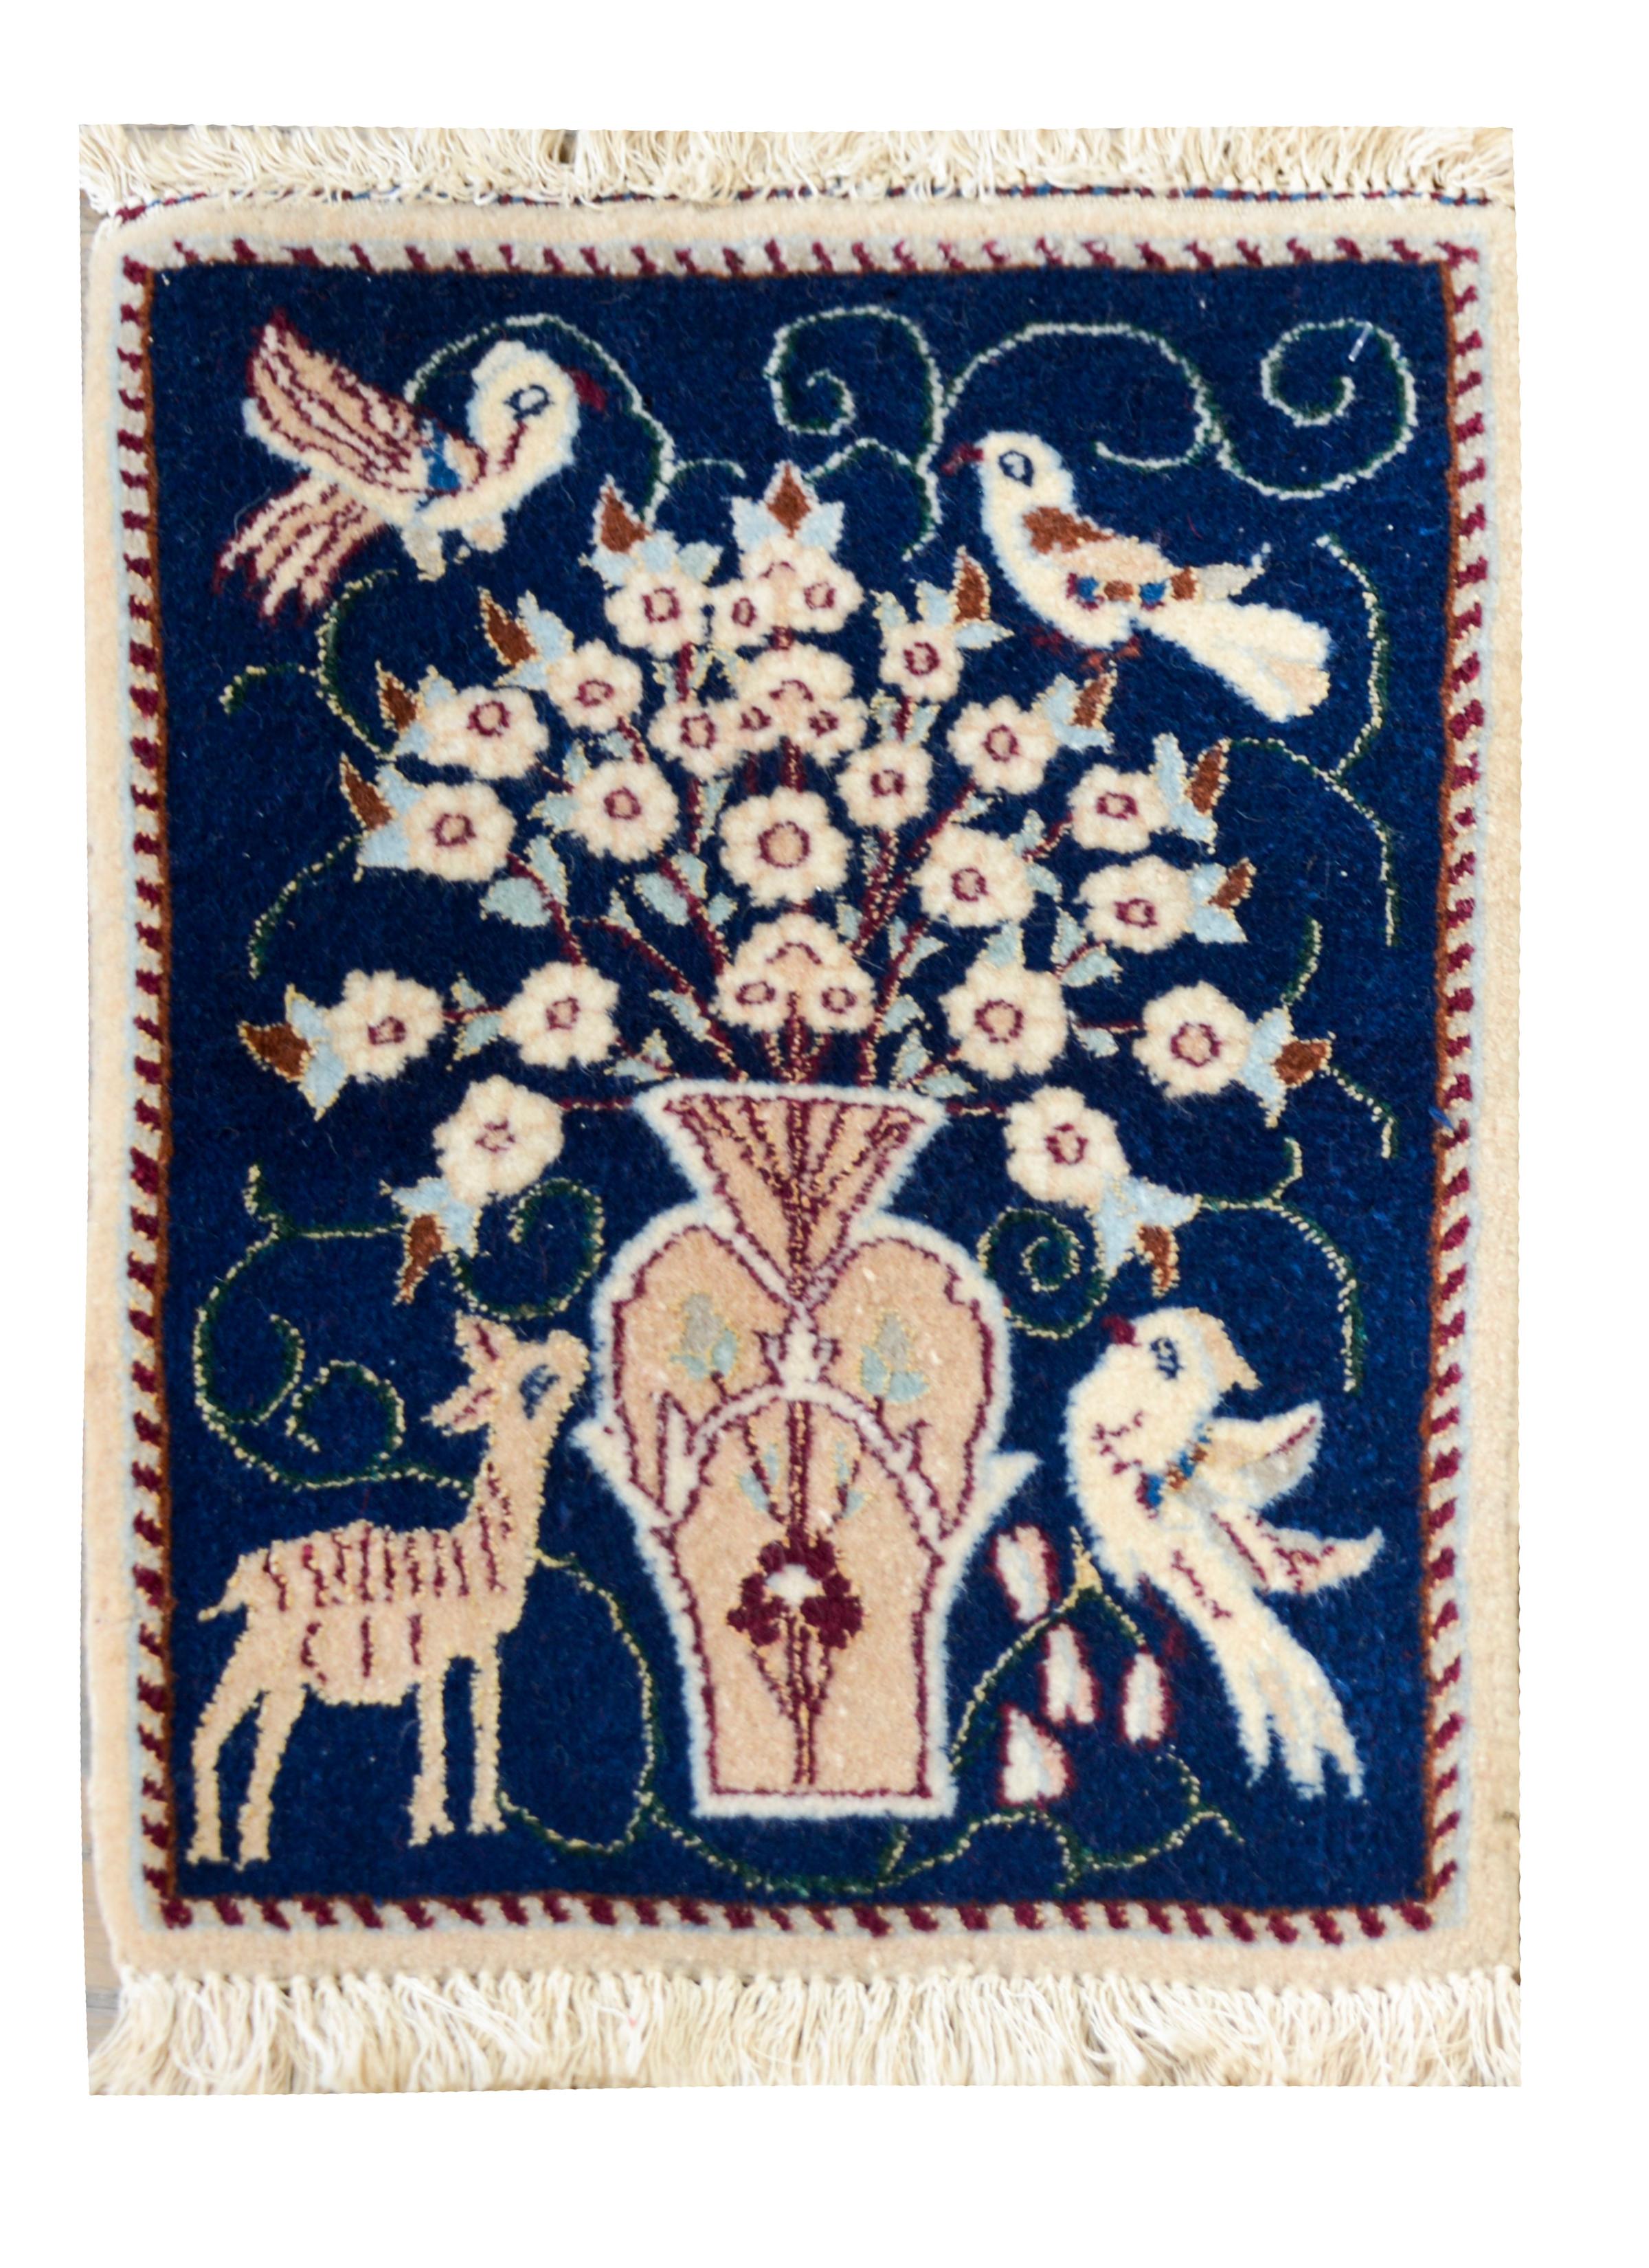 A wonderful pair of mid-20th century Persian Nain rugs each depicting a large central vase with flowers and birds perched in the branches, and a deer and bird flanking the vase below. It's very rare to find a pair of rugs, especially of this size.